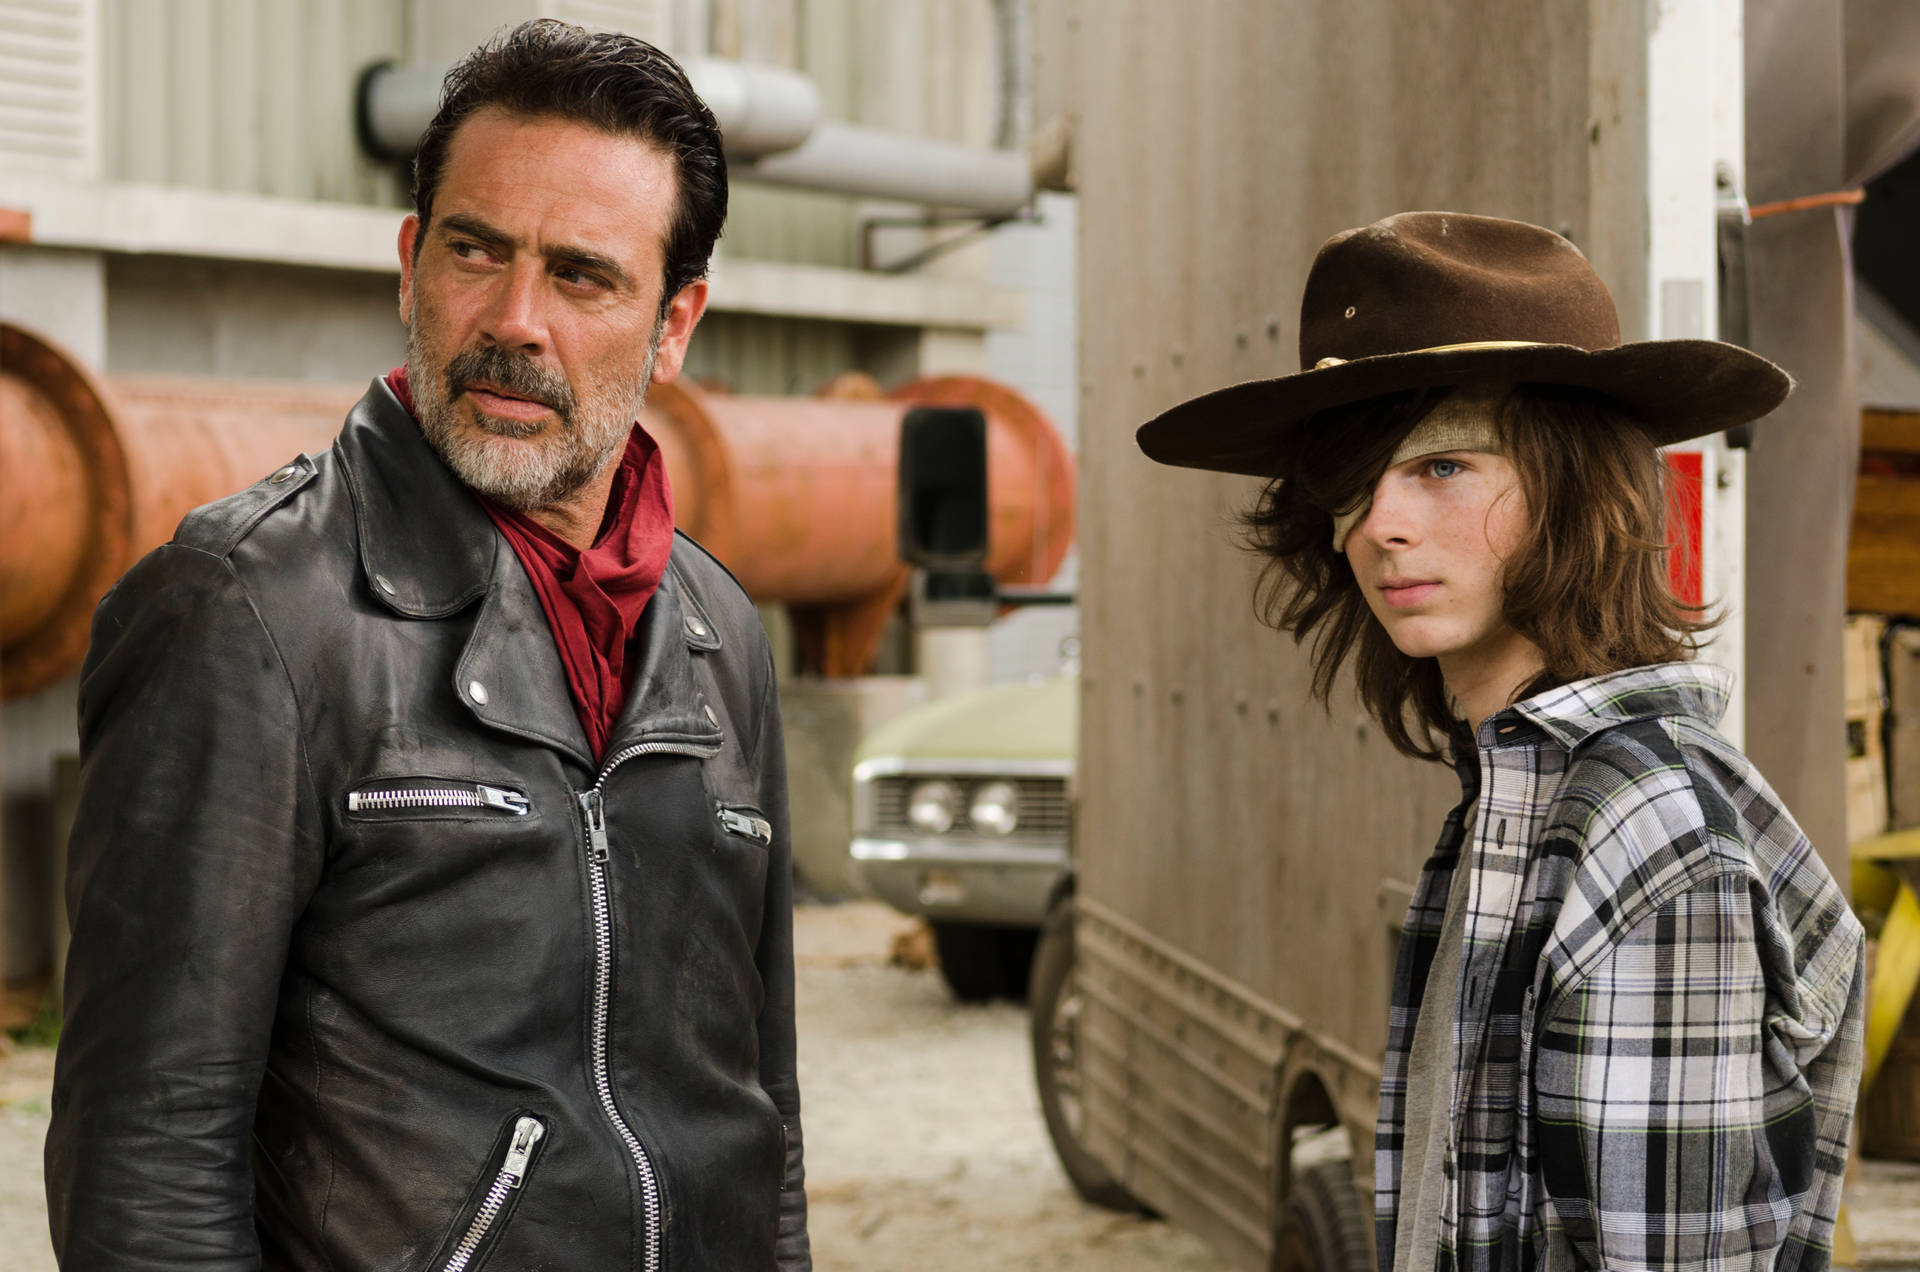 Negan And Carl Standing Together Background